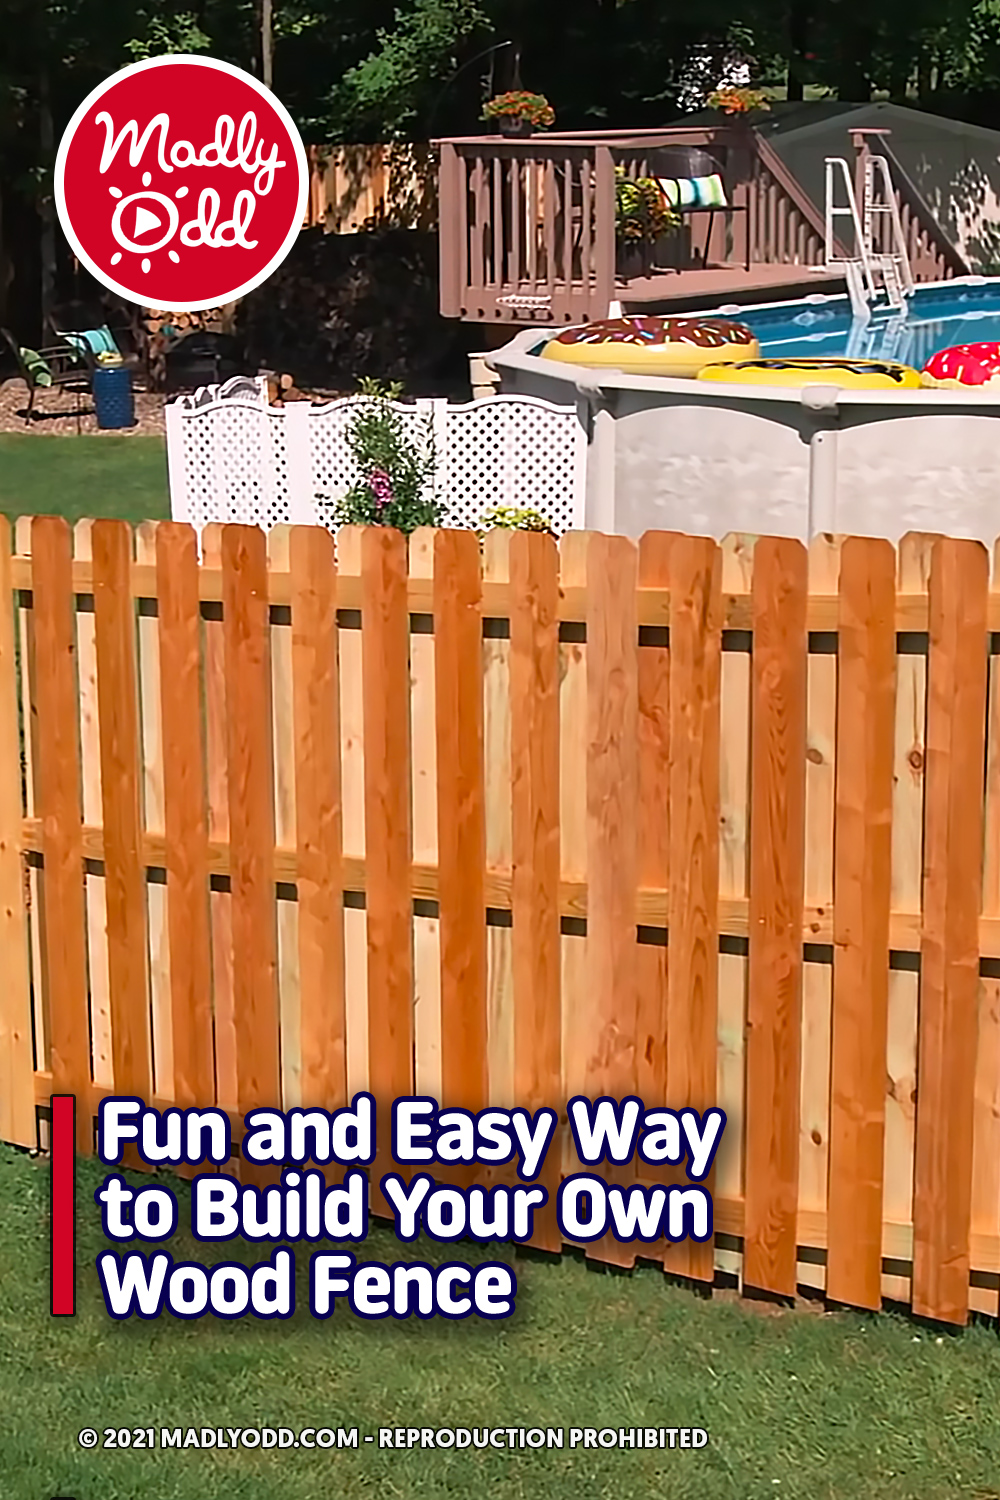 Fun and Easy Way to Build Your Own Wood Fence